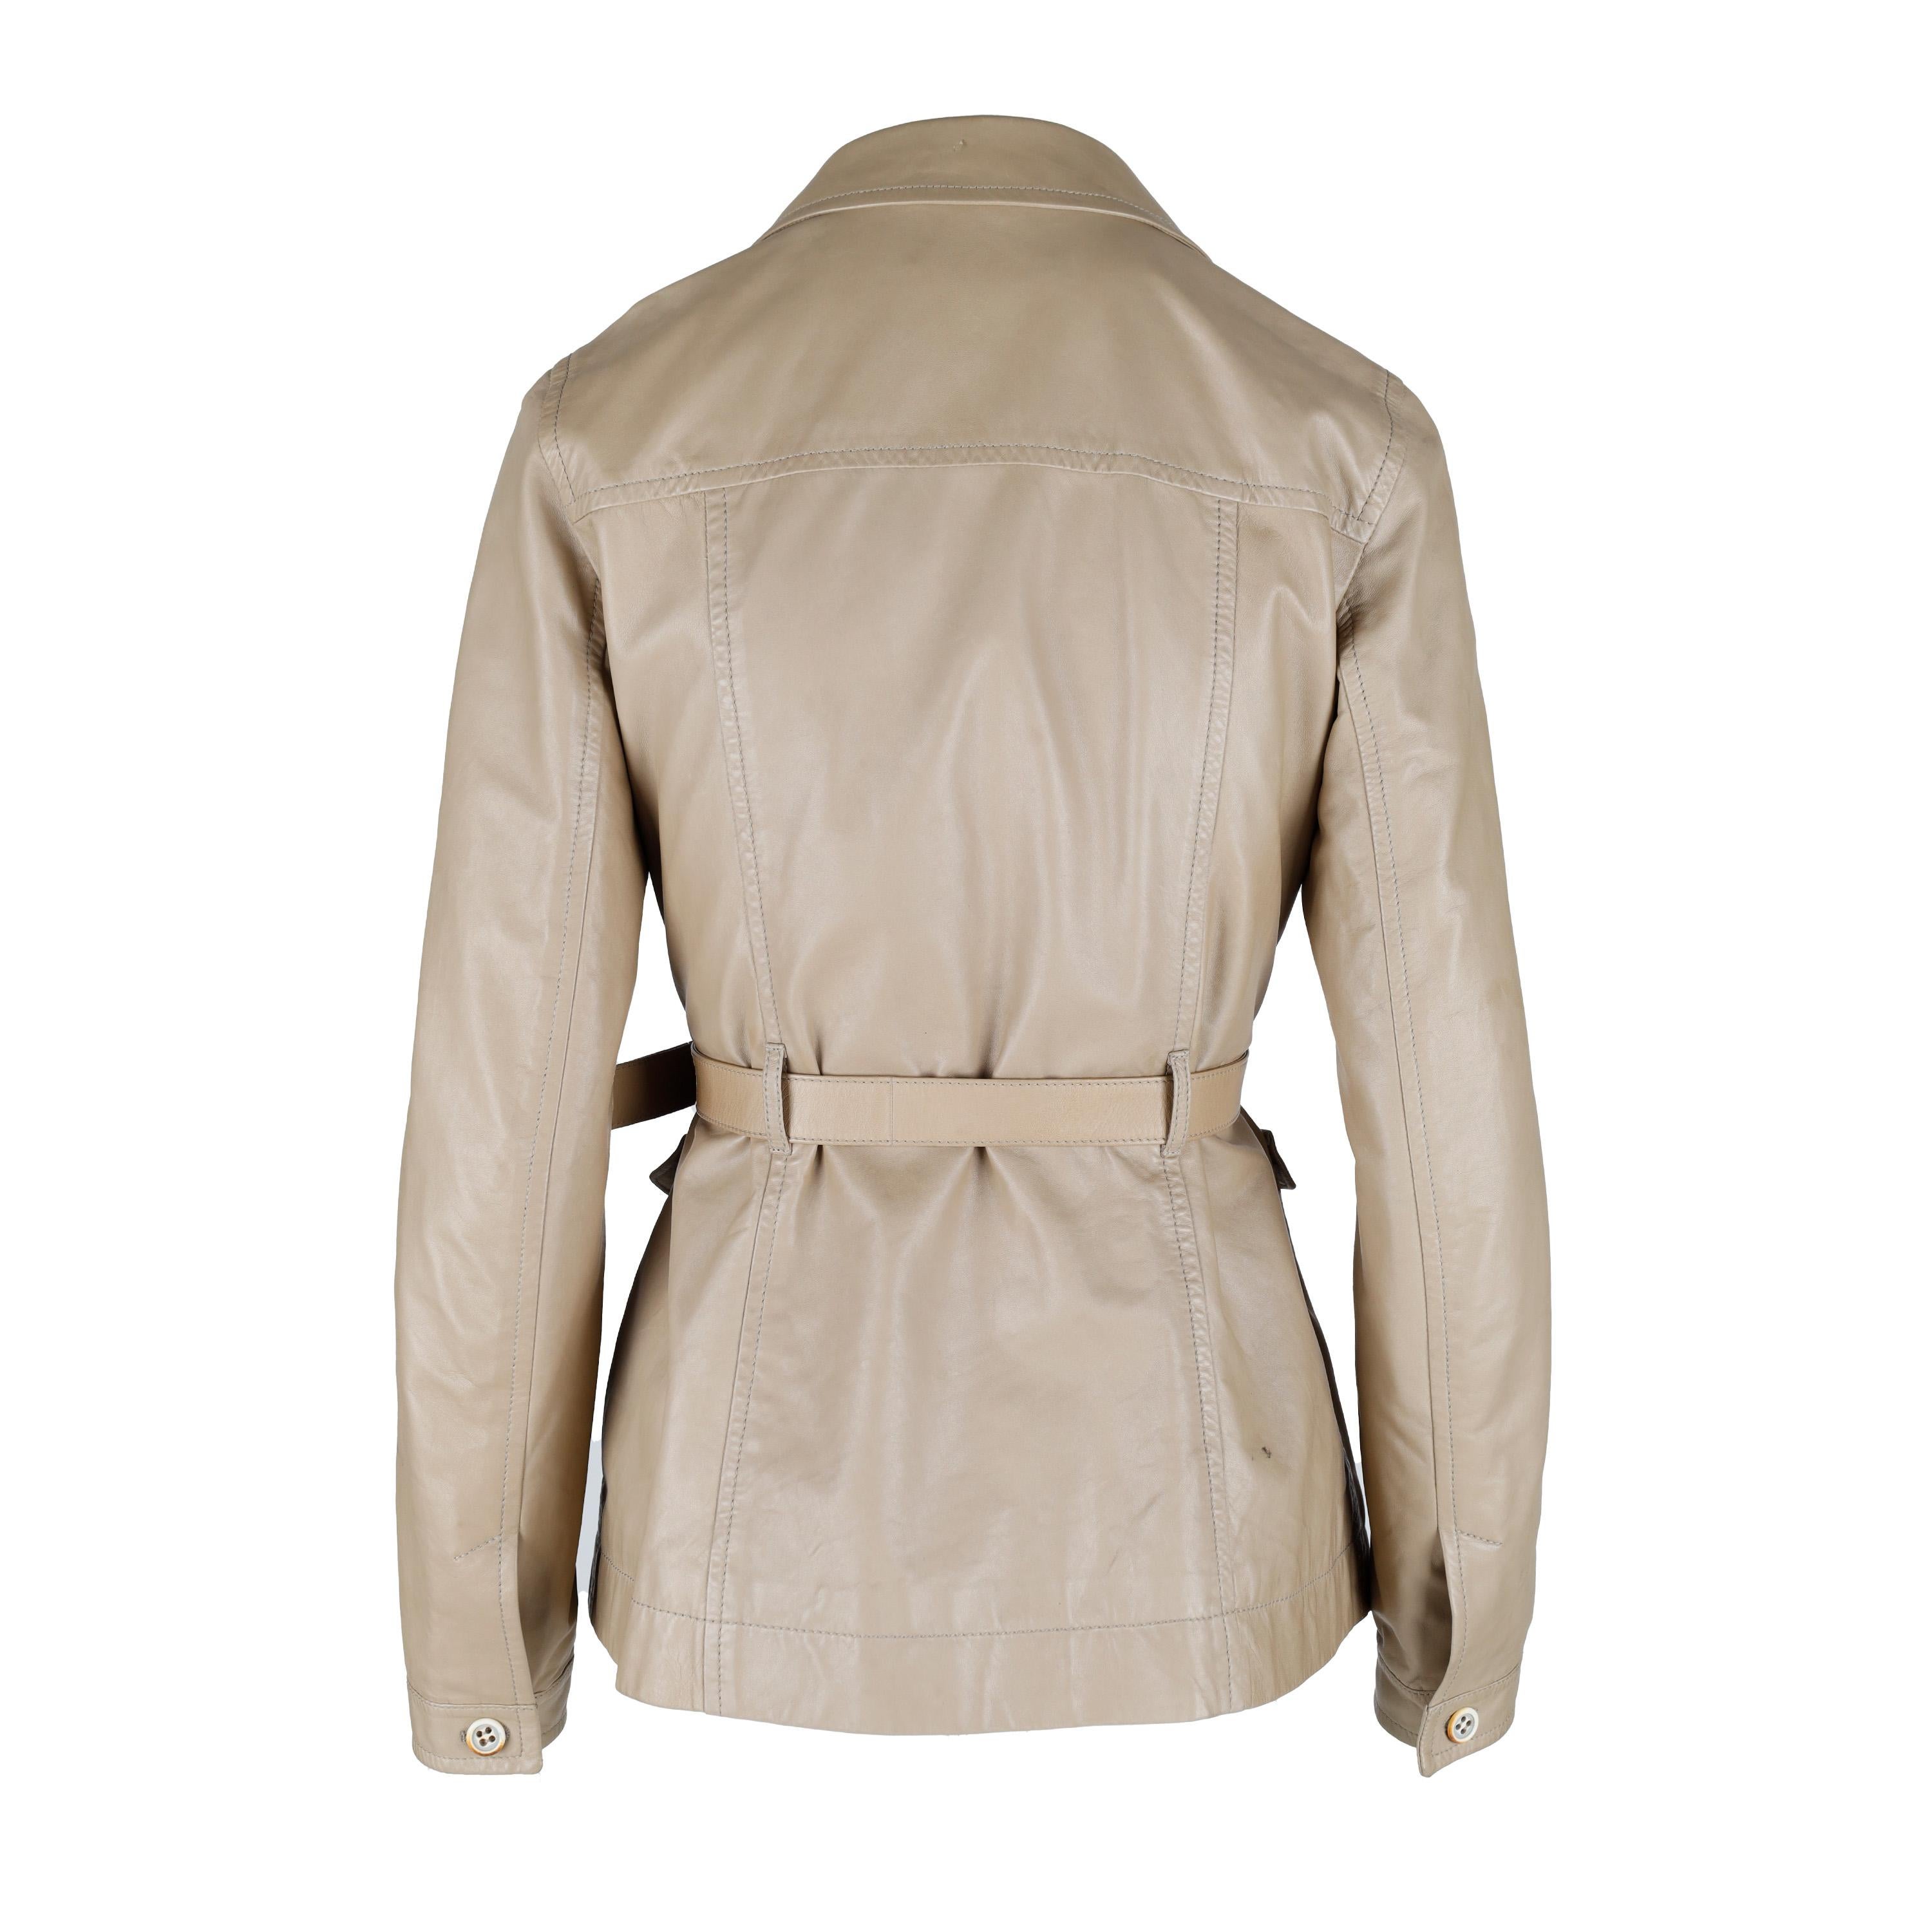 This Prada leather jacket is crafted from soft beige leather for a modern yet classic look. It features a structured silhouette with front pockets and lapel collar, along with a buckle-adjustable belt for added shaping. Perfect for any